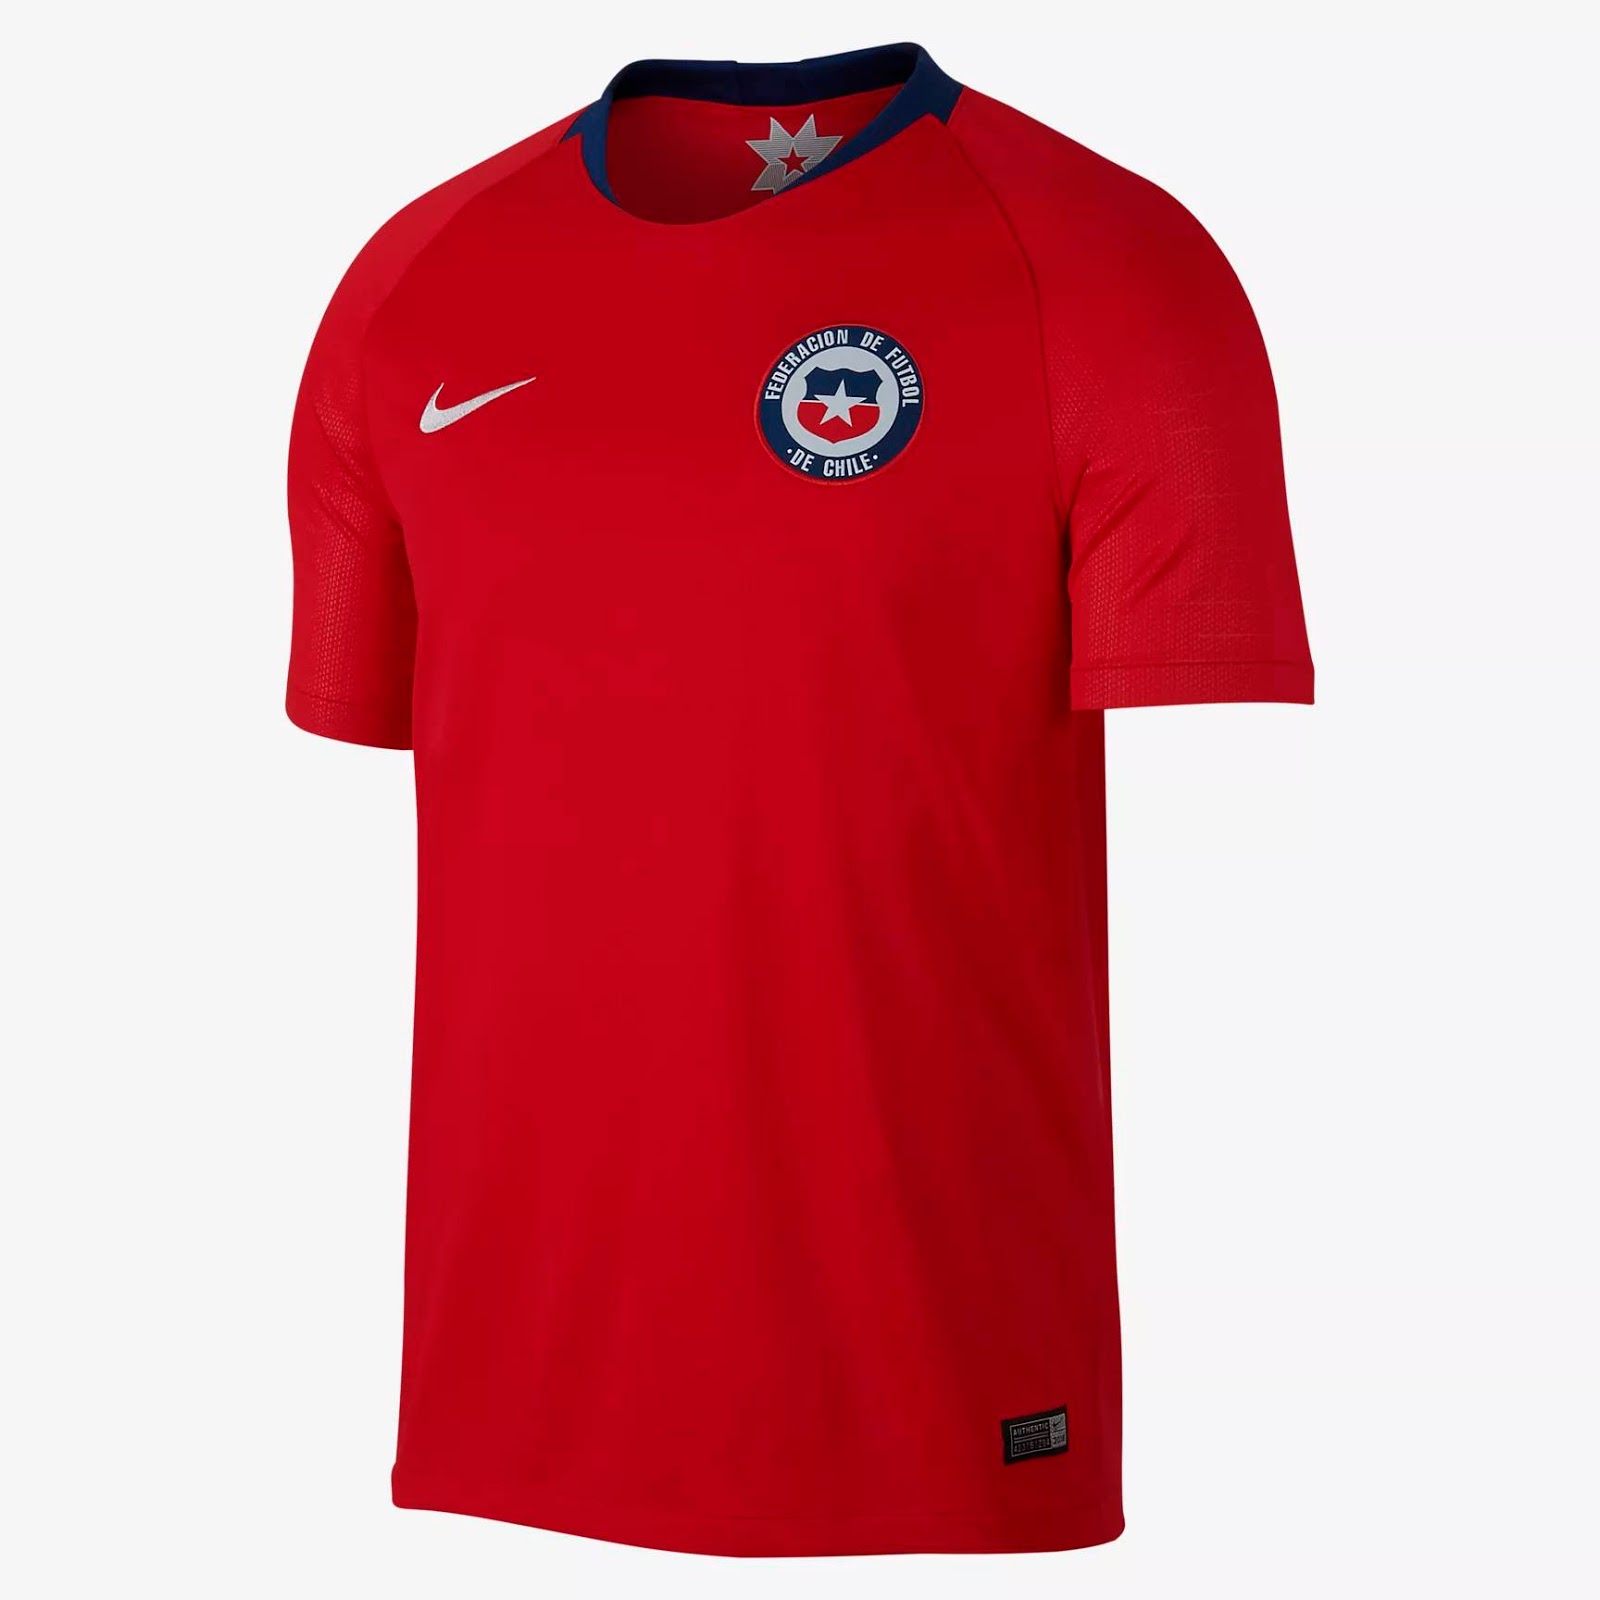 2019 Copa America Kit Overview - Here Are All 12 Teams' Home & Away ...